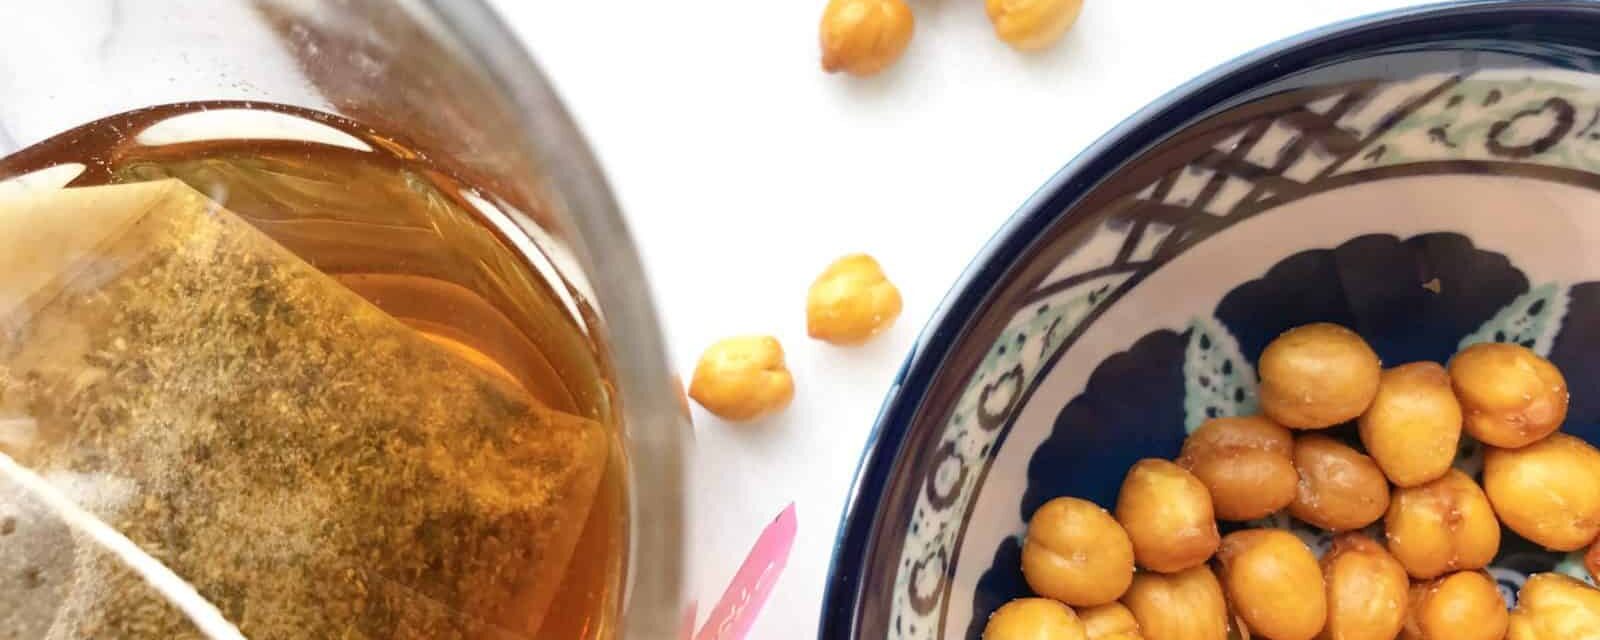 CARE Snack: Roasted Chickpeas and Herbal Digestive Tea